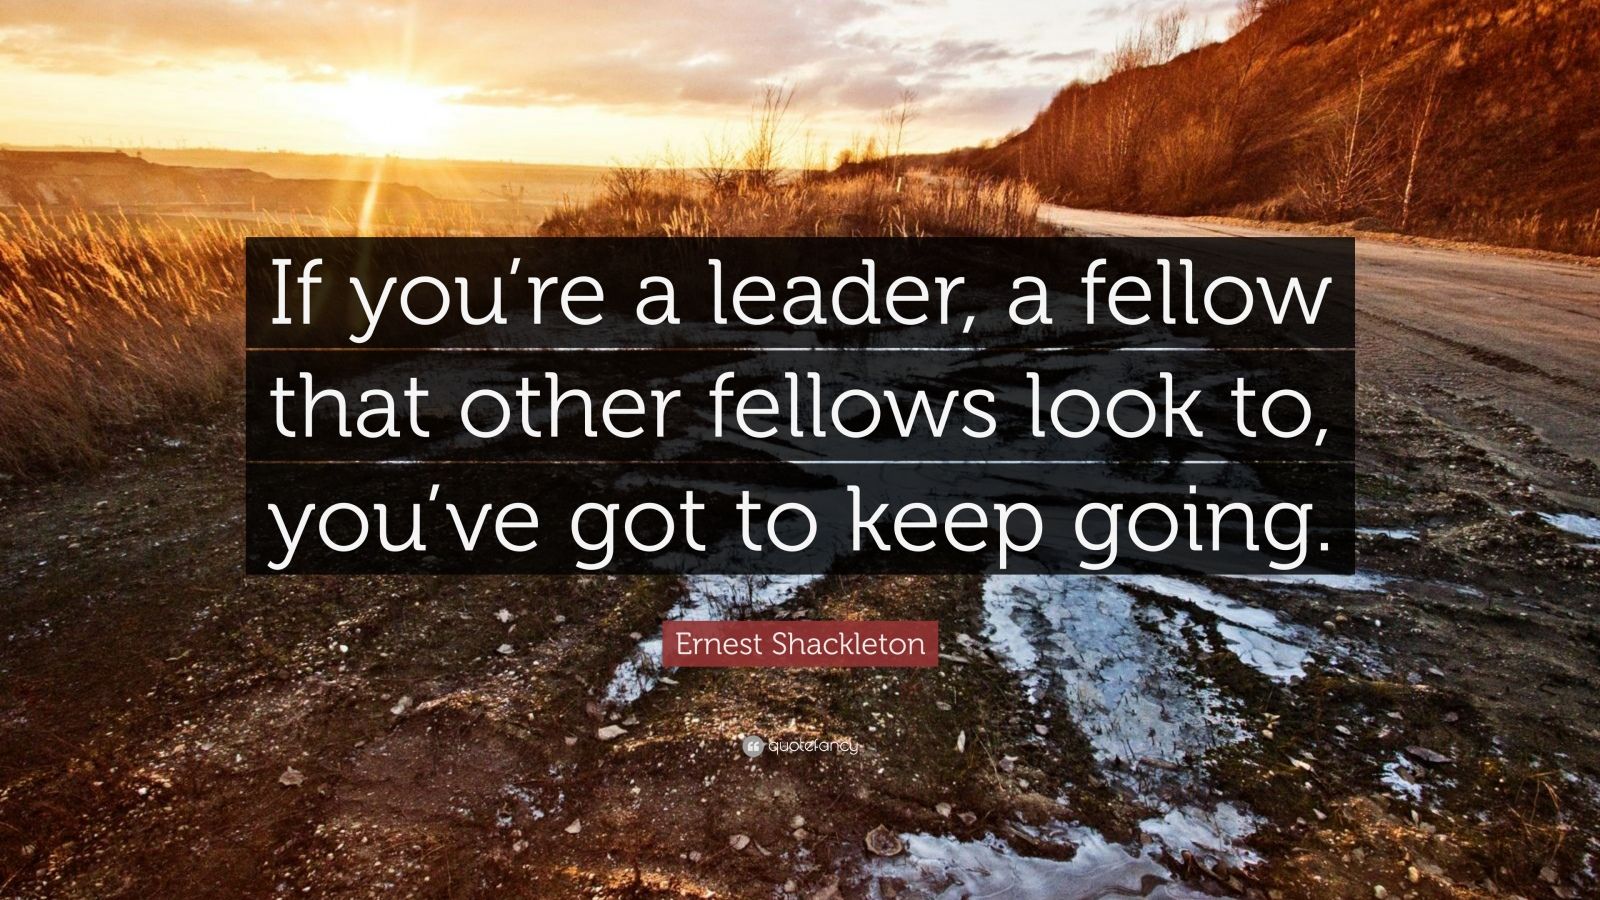 Ernest Shackleton Quote: “If you’re a leader, a fellow that other